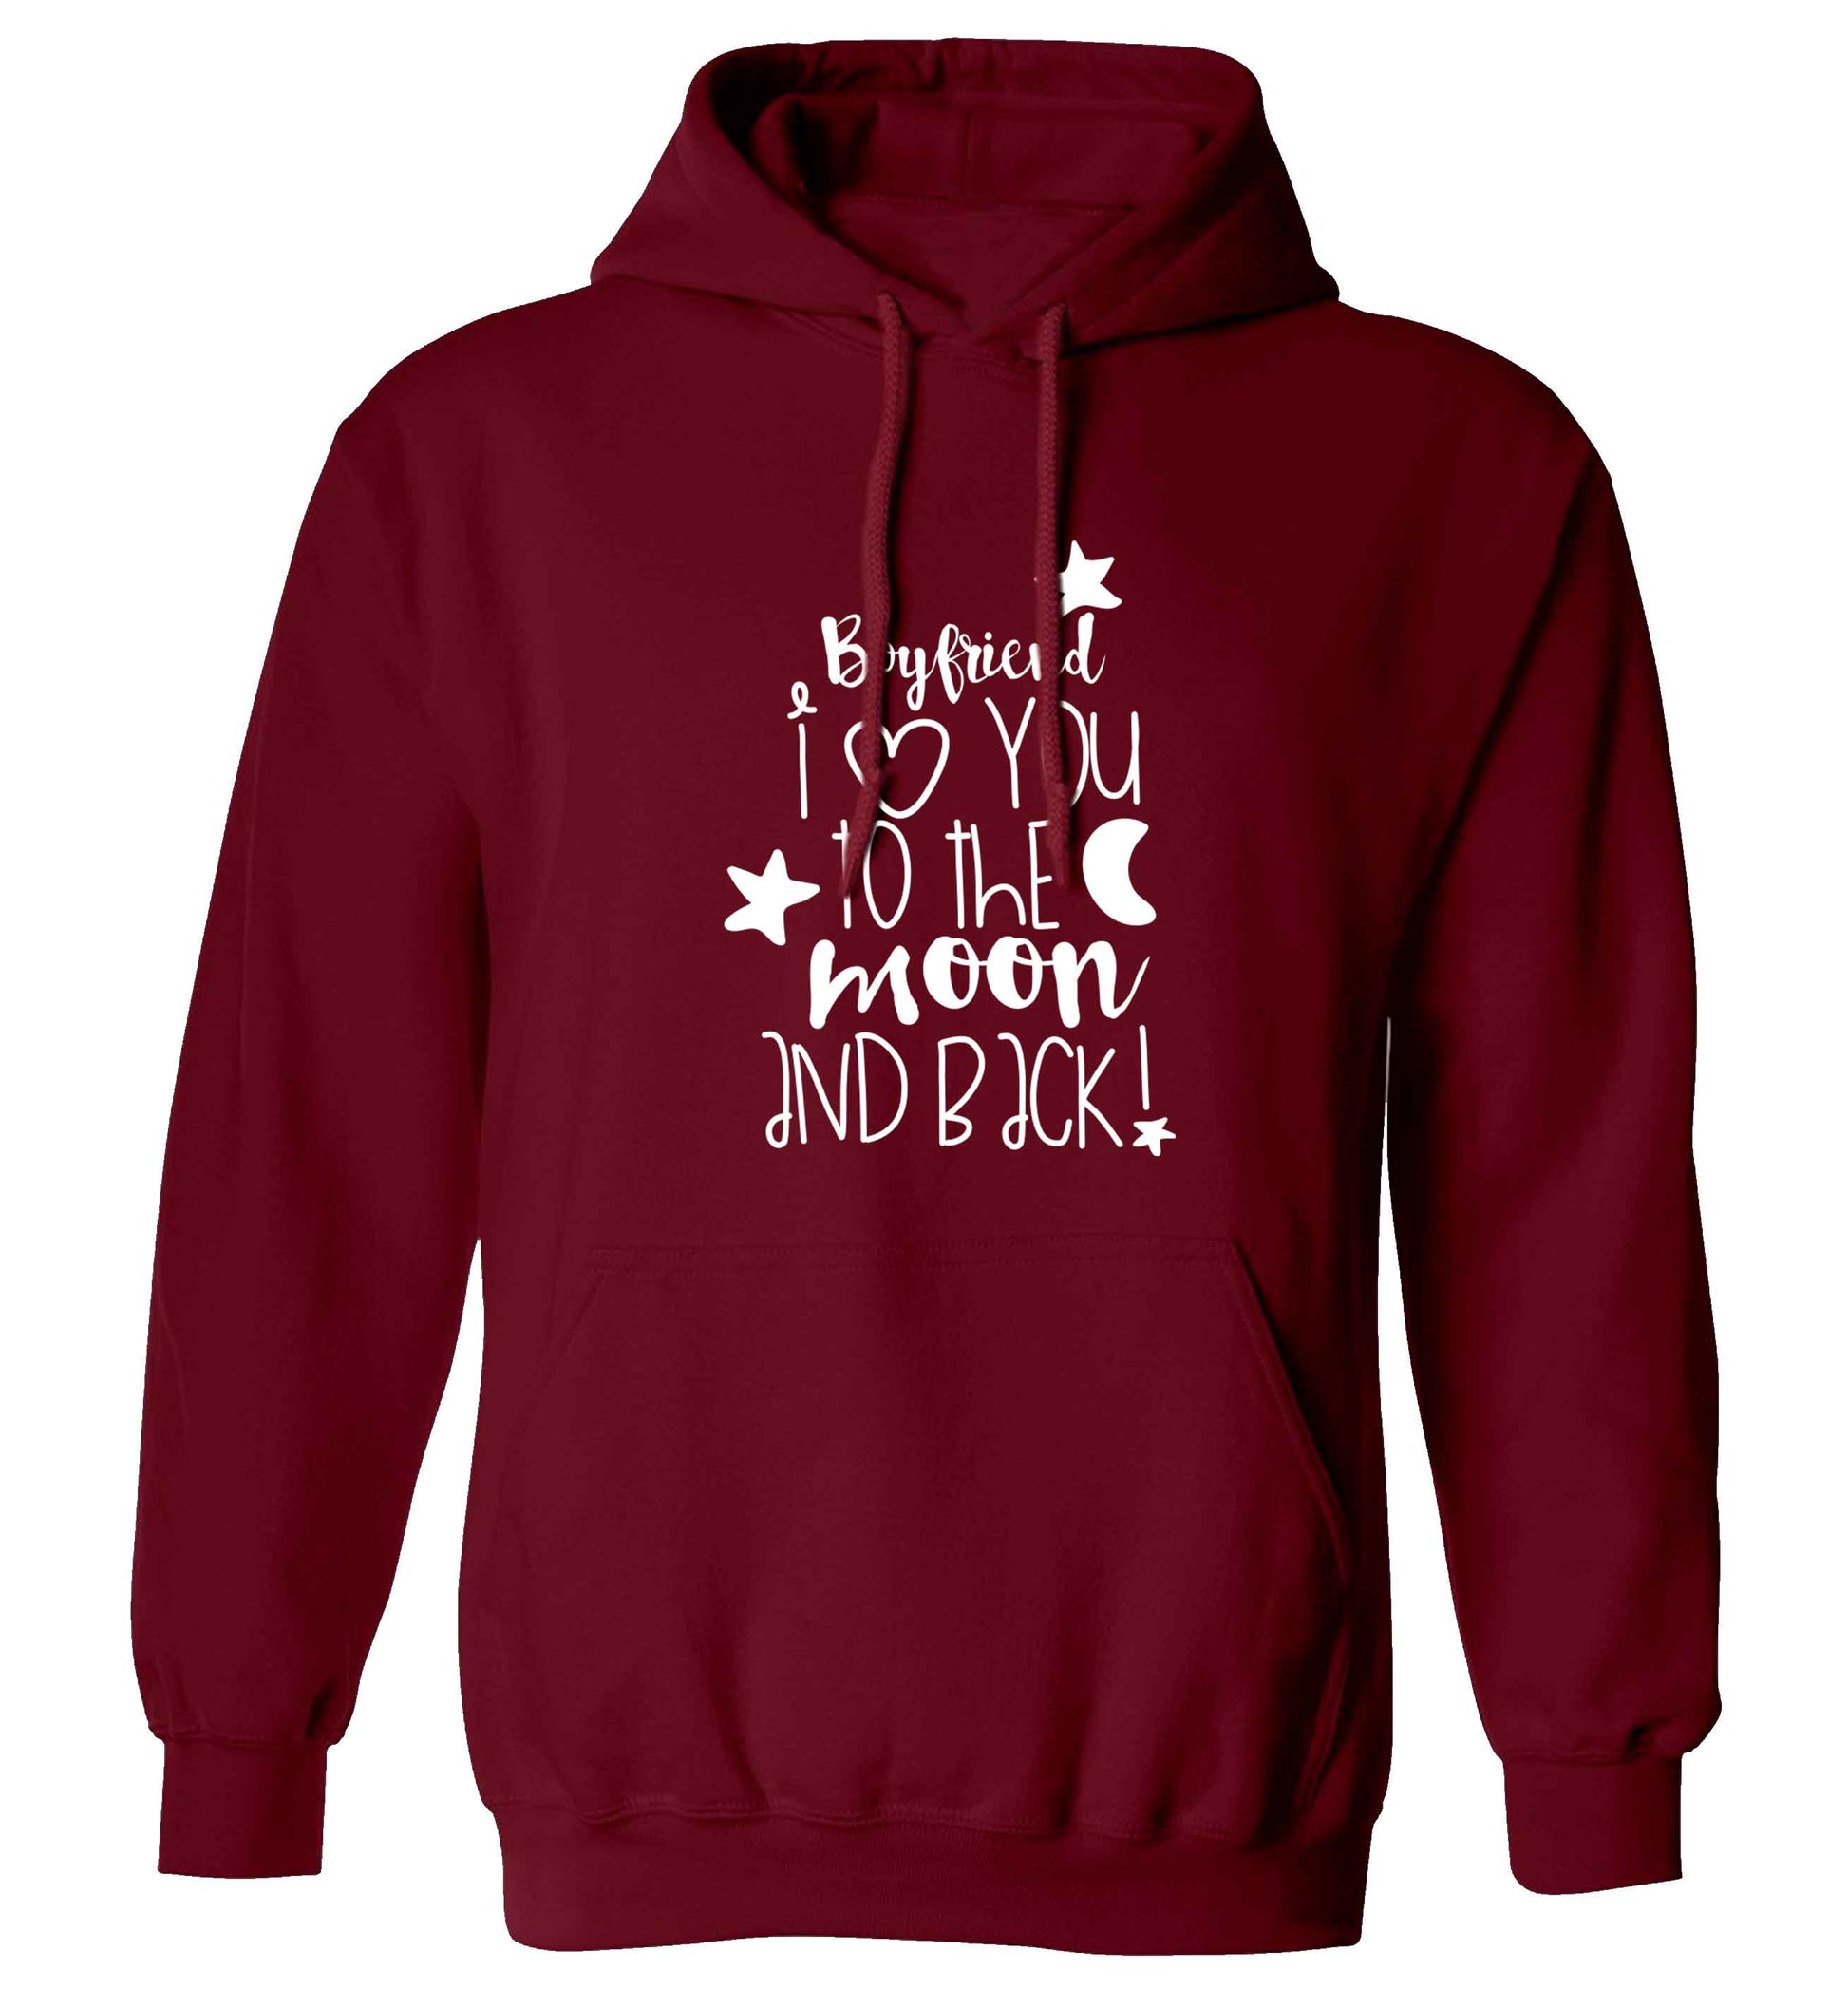 Boyfriend I love you to the moon and back adults unisex maroon hoodie 2XL